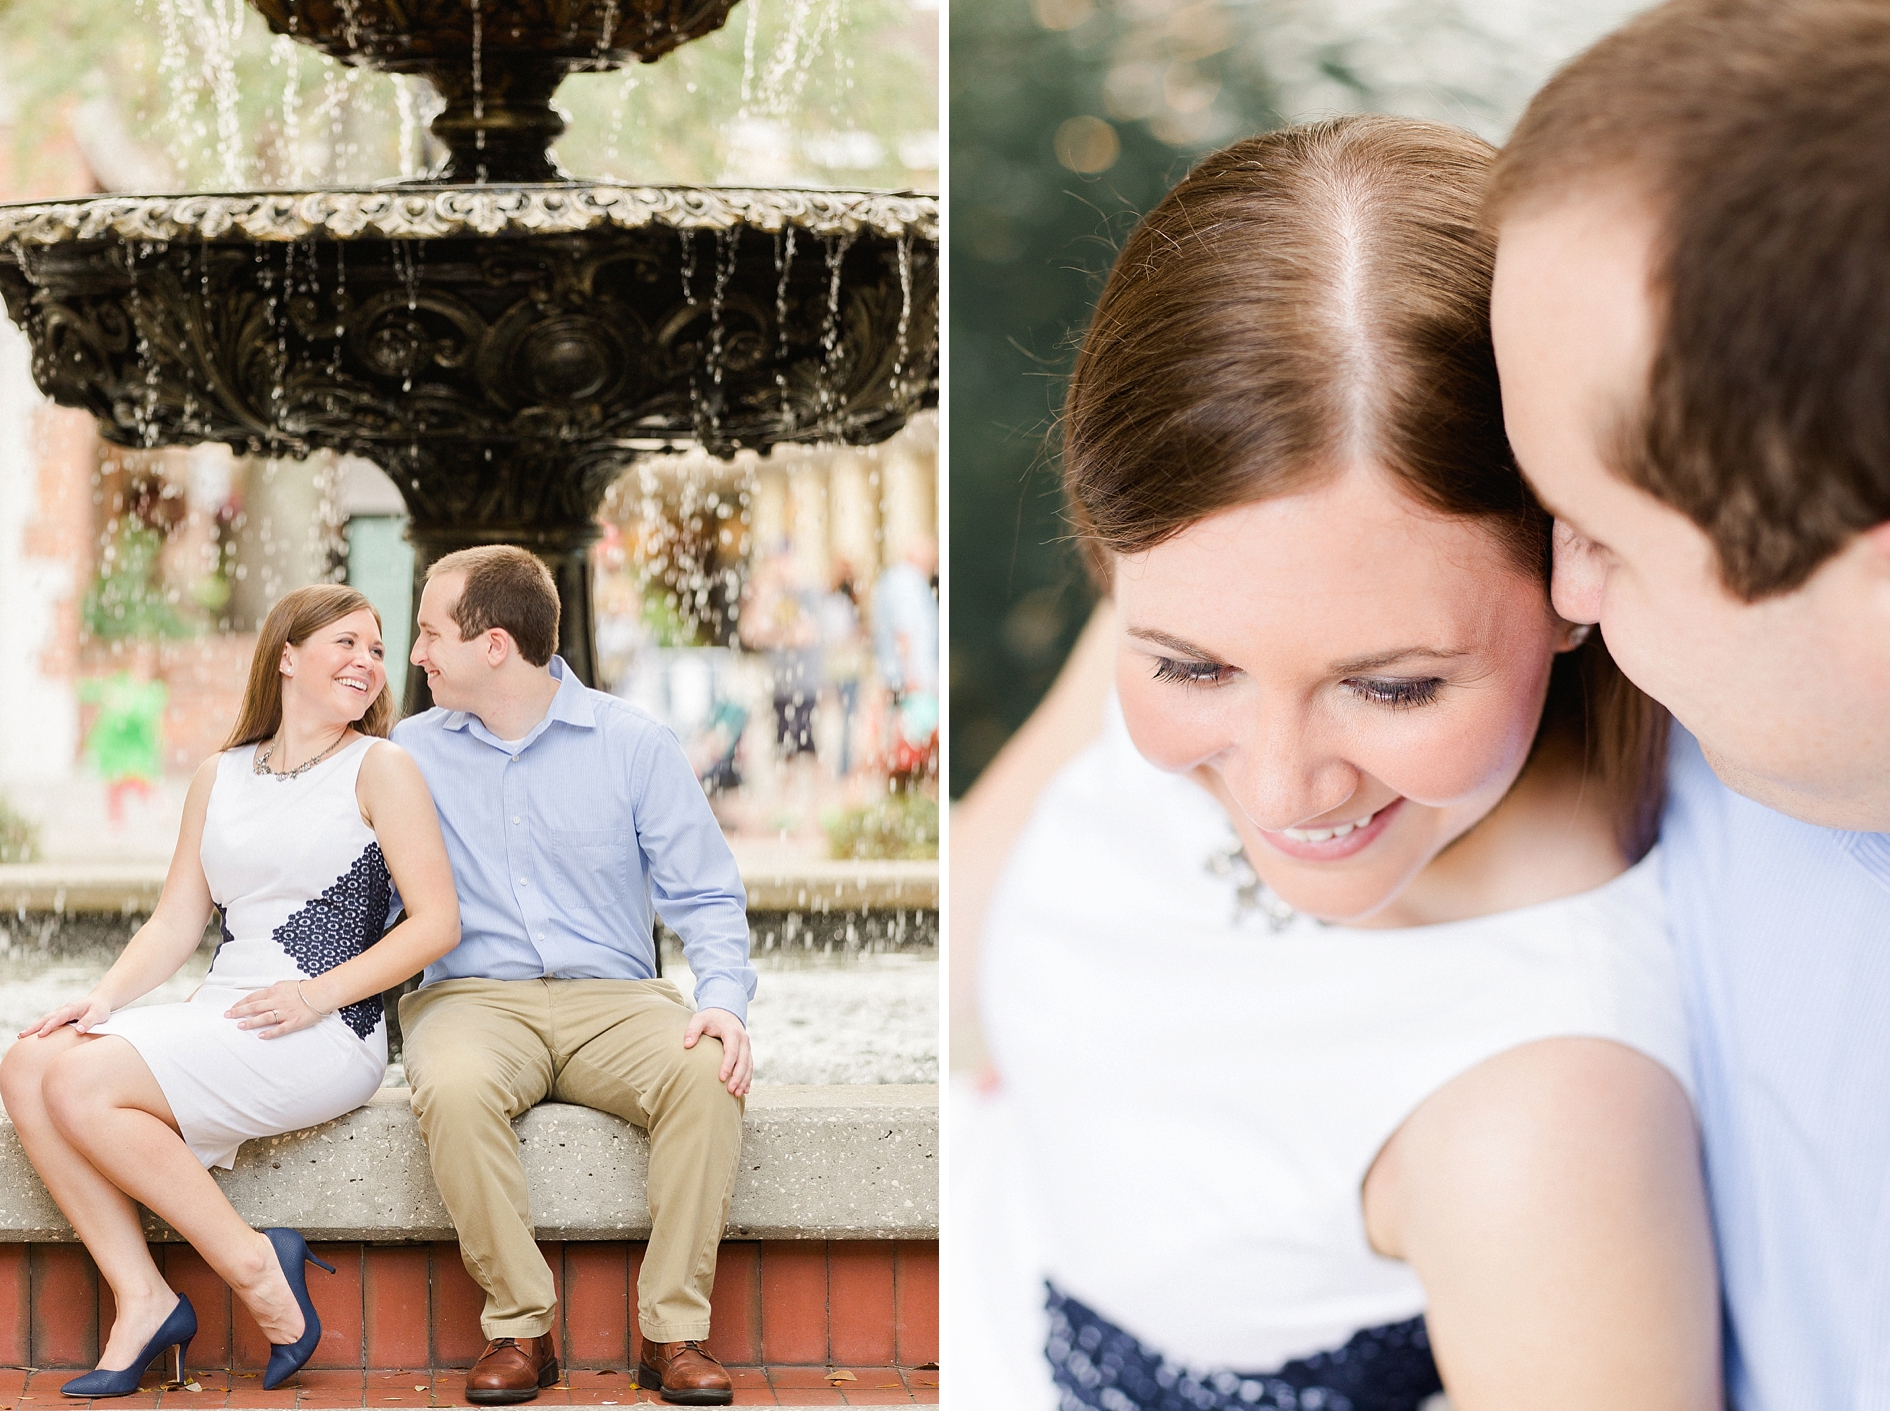 Old Hyde Park Engagement | © Ailyn La Torre Photography 2015